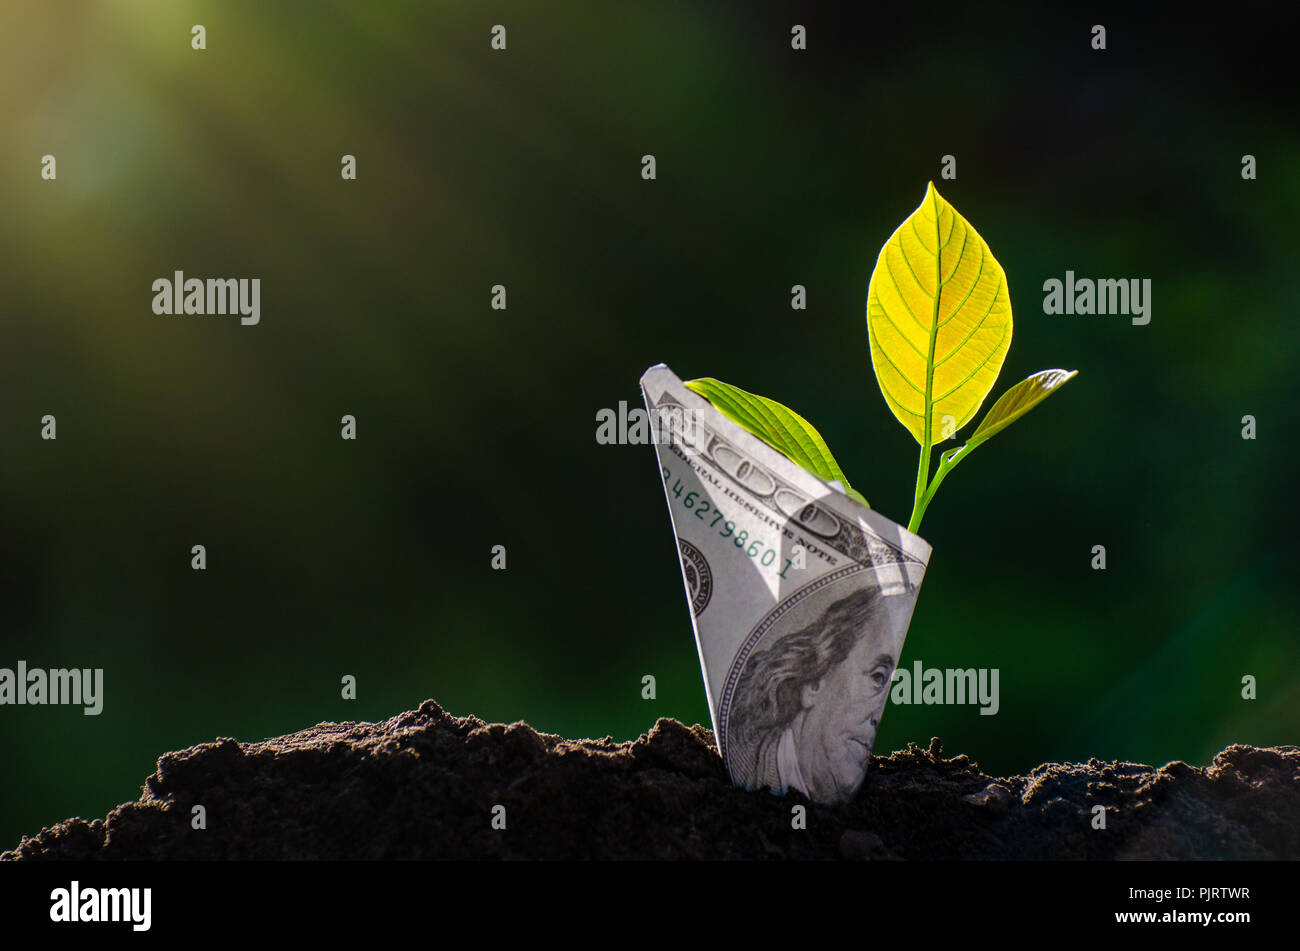 Banknotes tree Image of bank note with plant growing on top for business green natural background money saving and investment financial concept Stock Photo